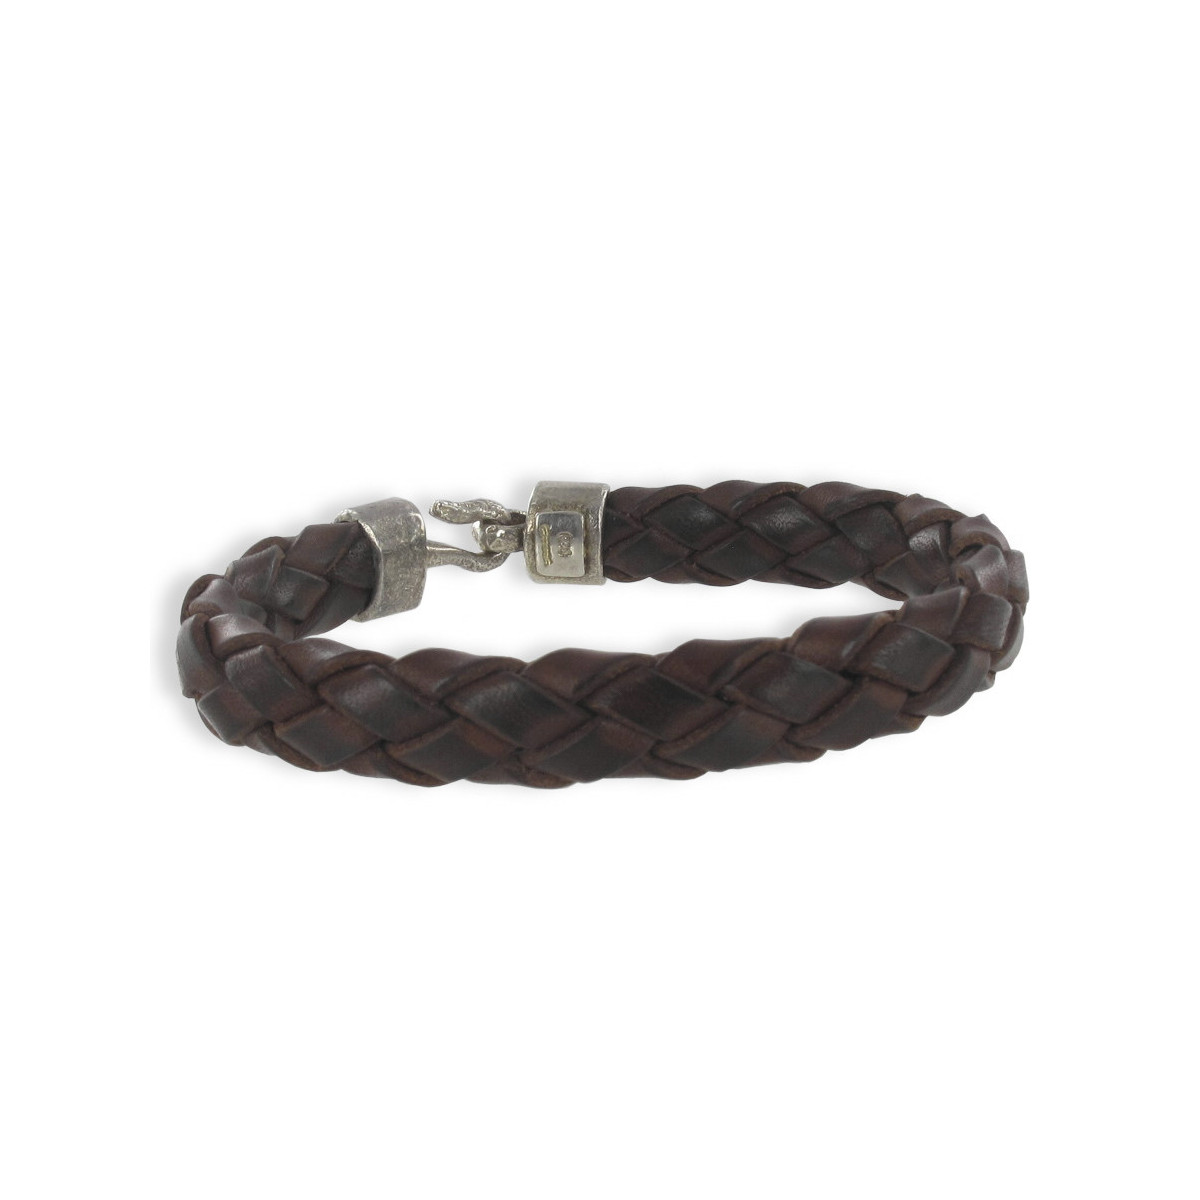 LEATHER AND SILVER BRACELET